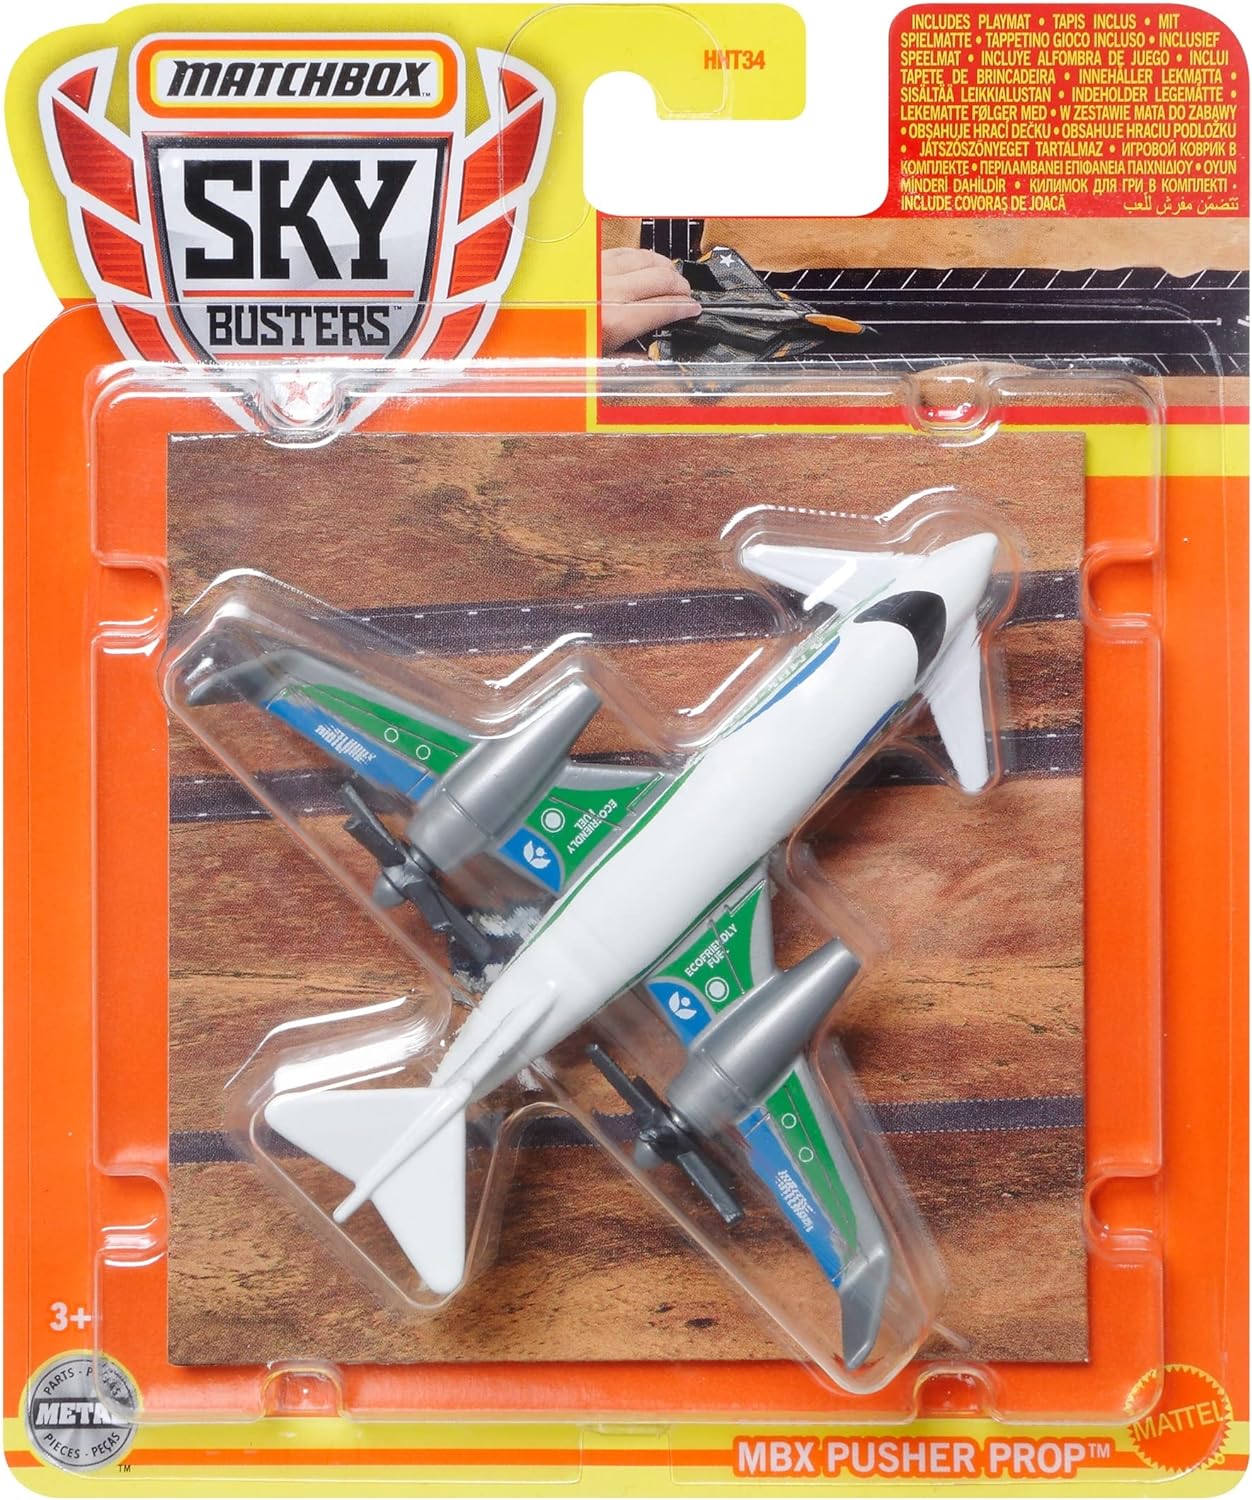 Matchbox Sky Busters Commercial Airliner Playset with Playmat (Styles Vary)